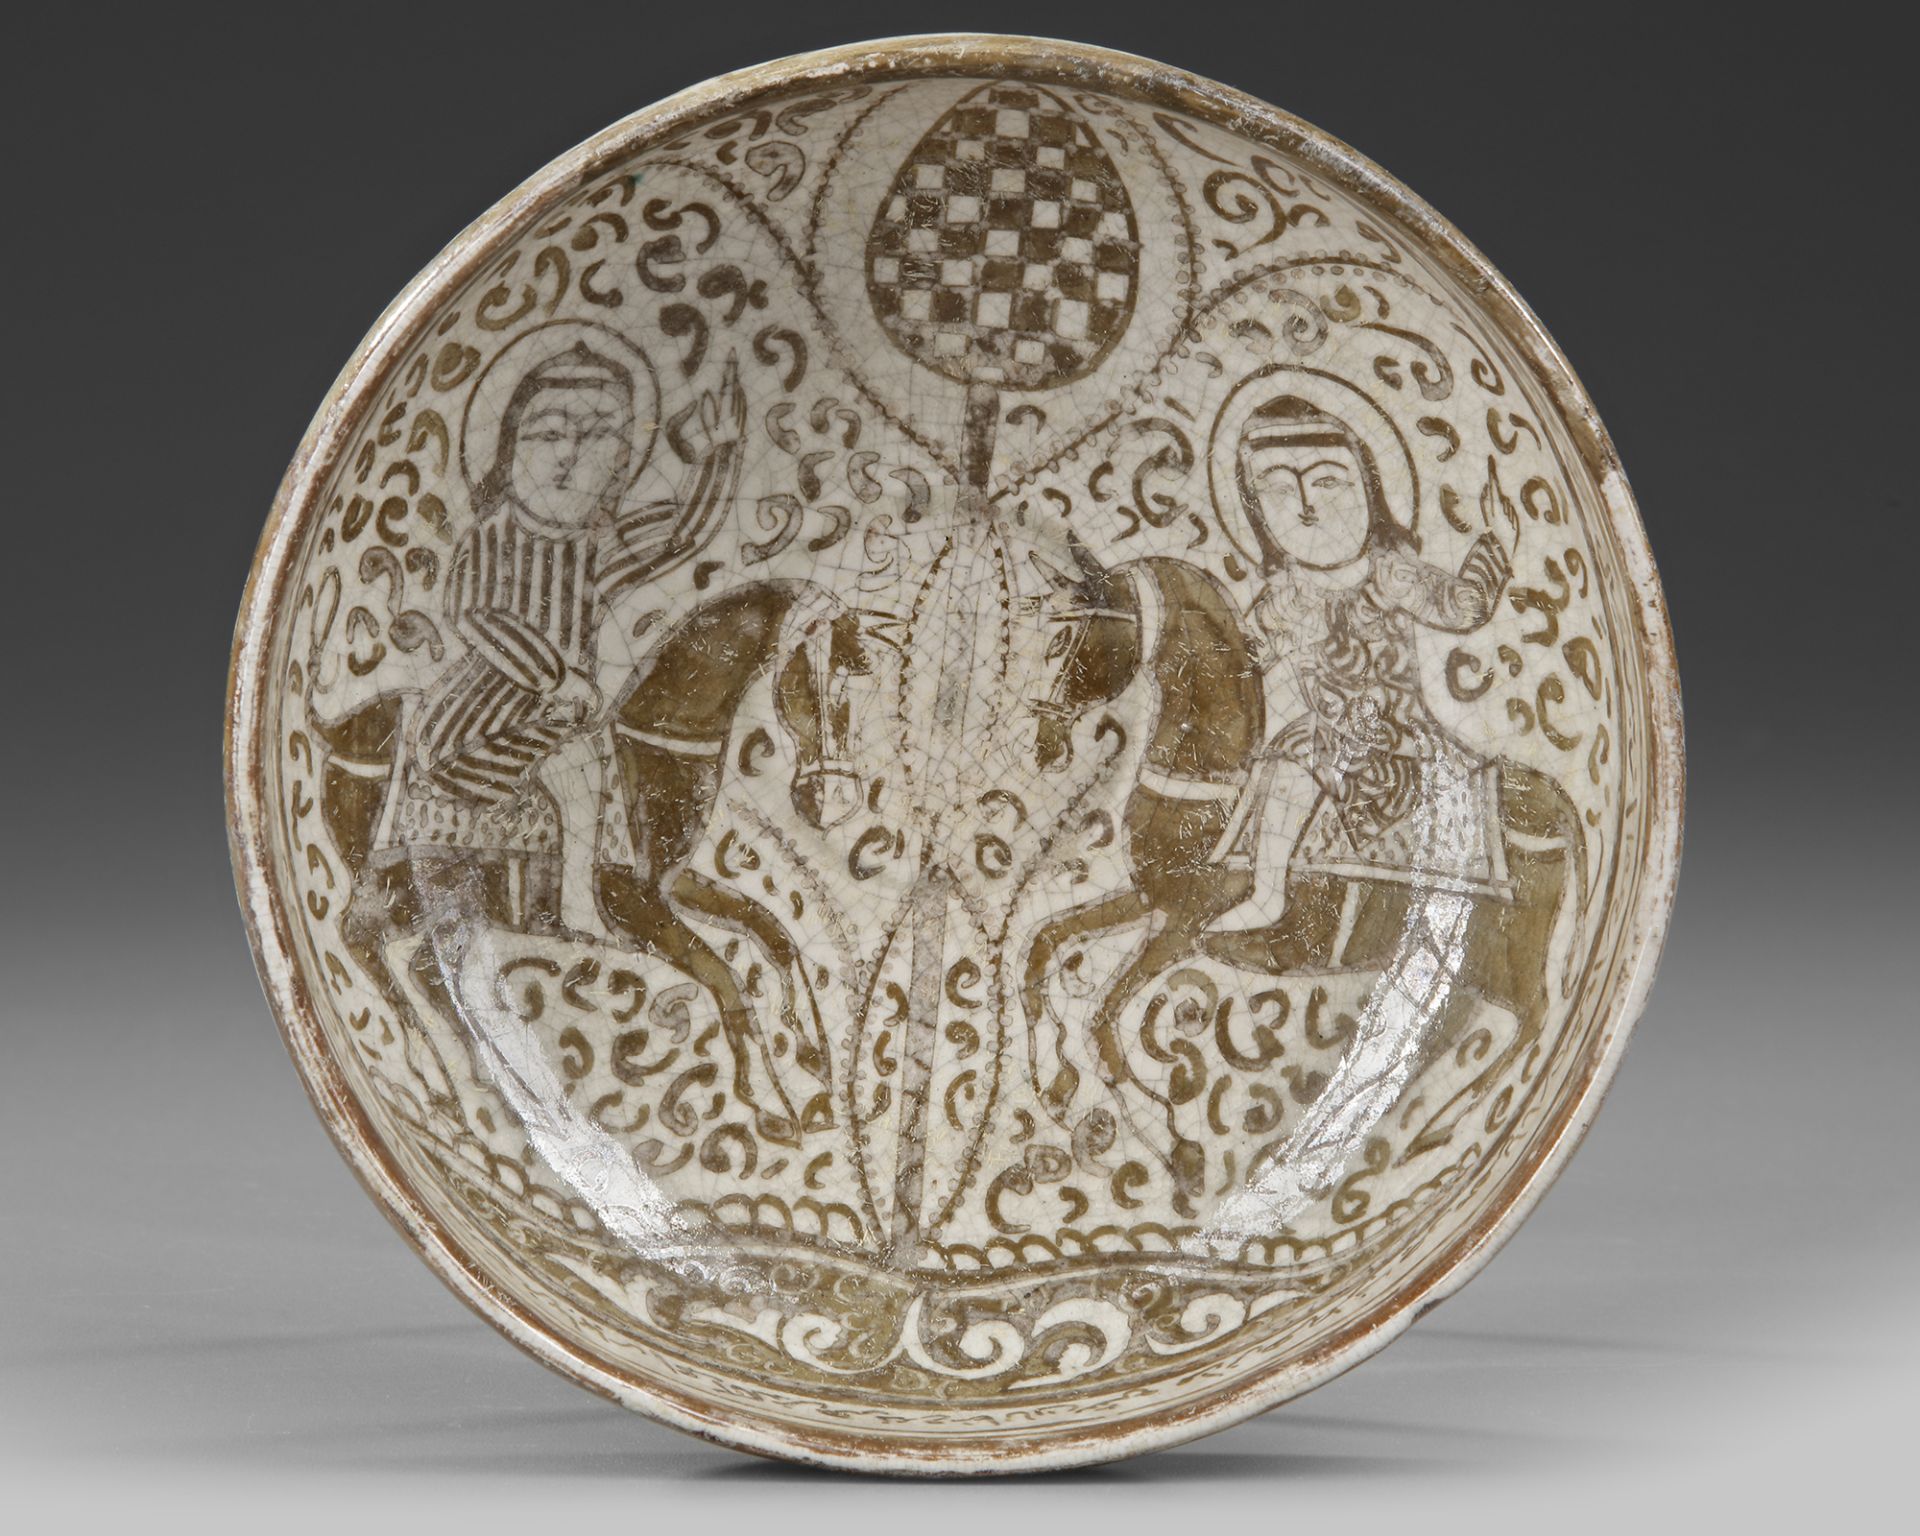 A KASHAN LUSTRE POTTERY BOWL, PERSIA, LATE 12TH - EARLY 13TH CENTURY